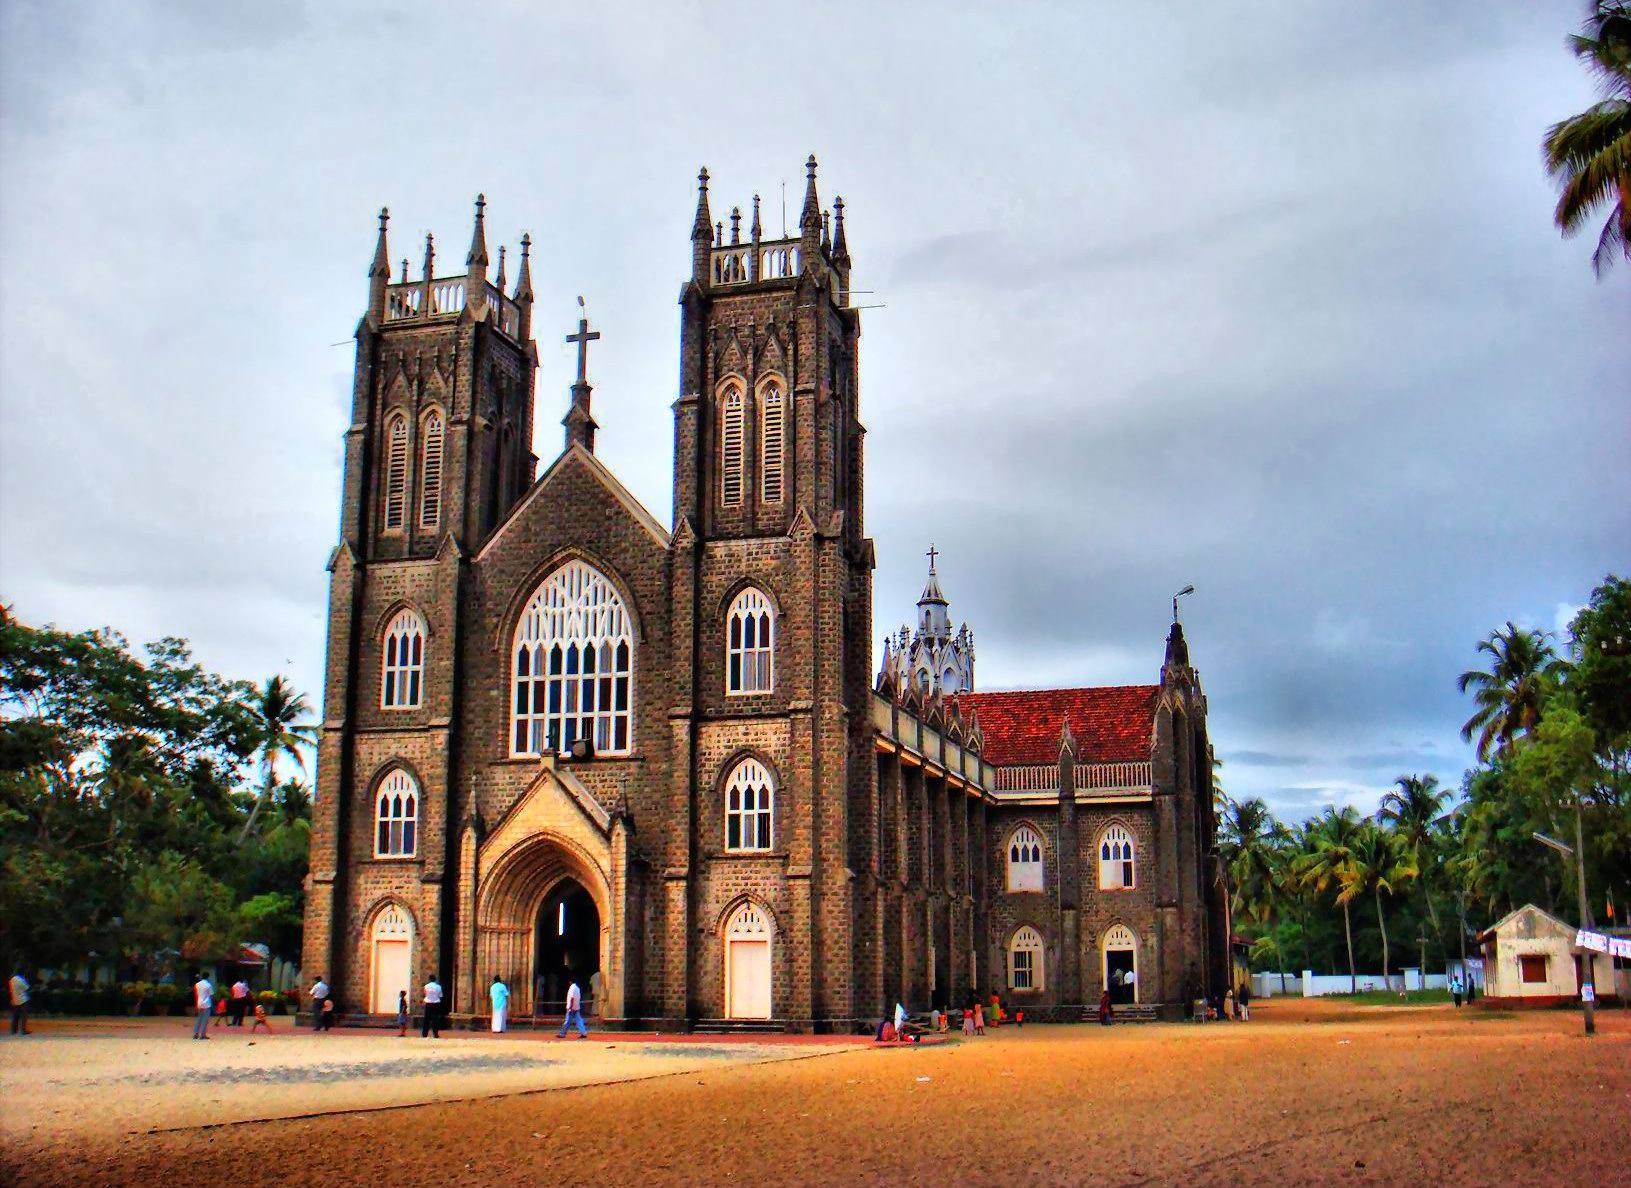 In PICTURES: 33 Most Stunning Churches of India - The Better India